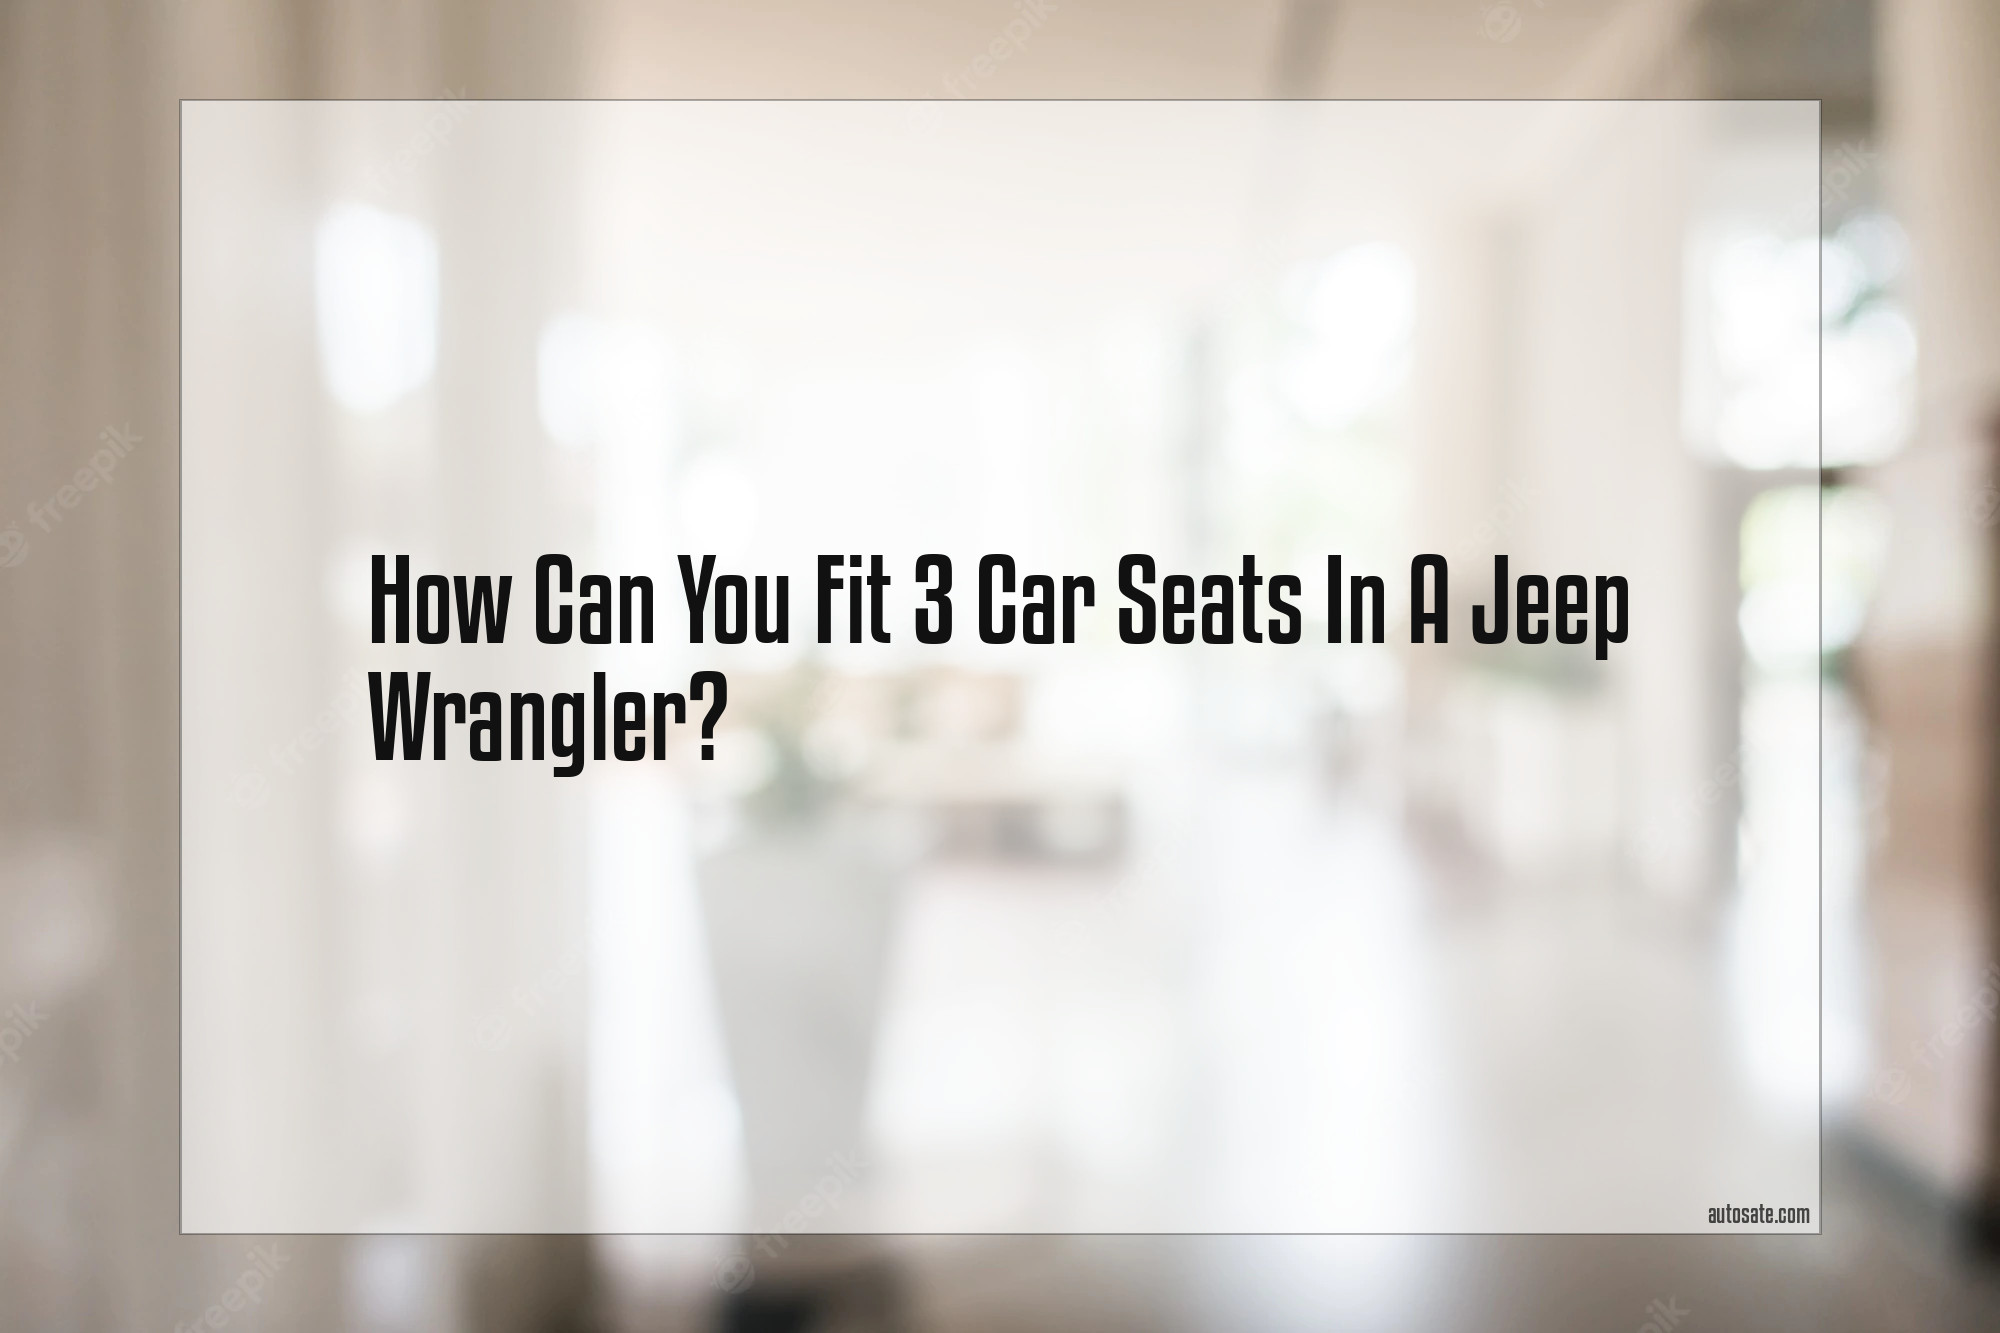 Can You Fit 3 Car Seats In A Jeep Wrangler